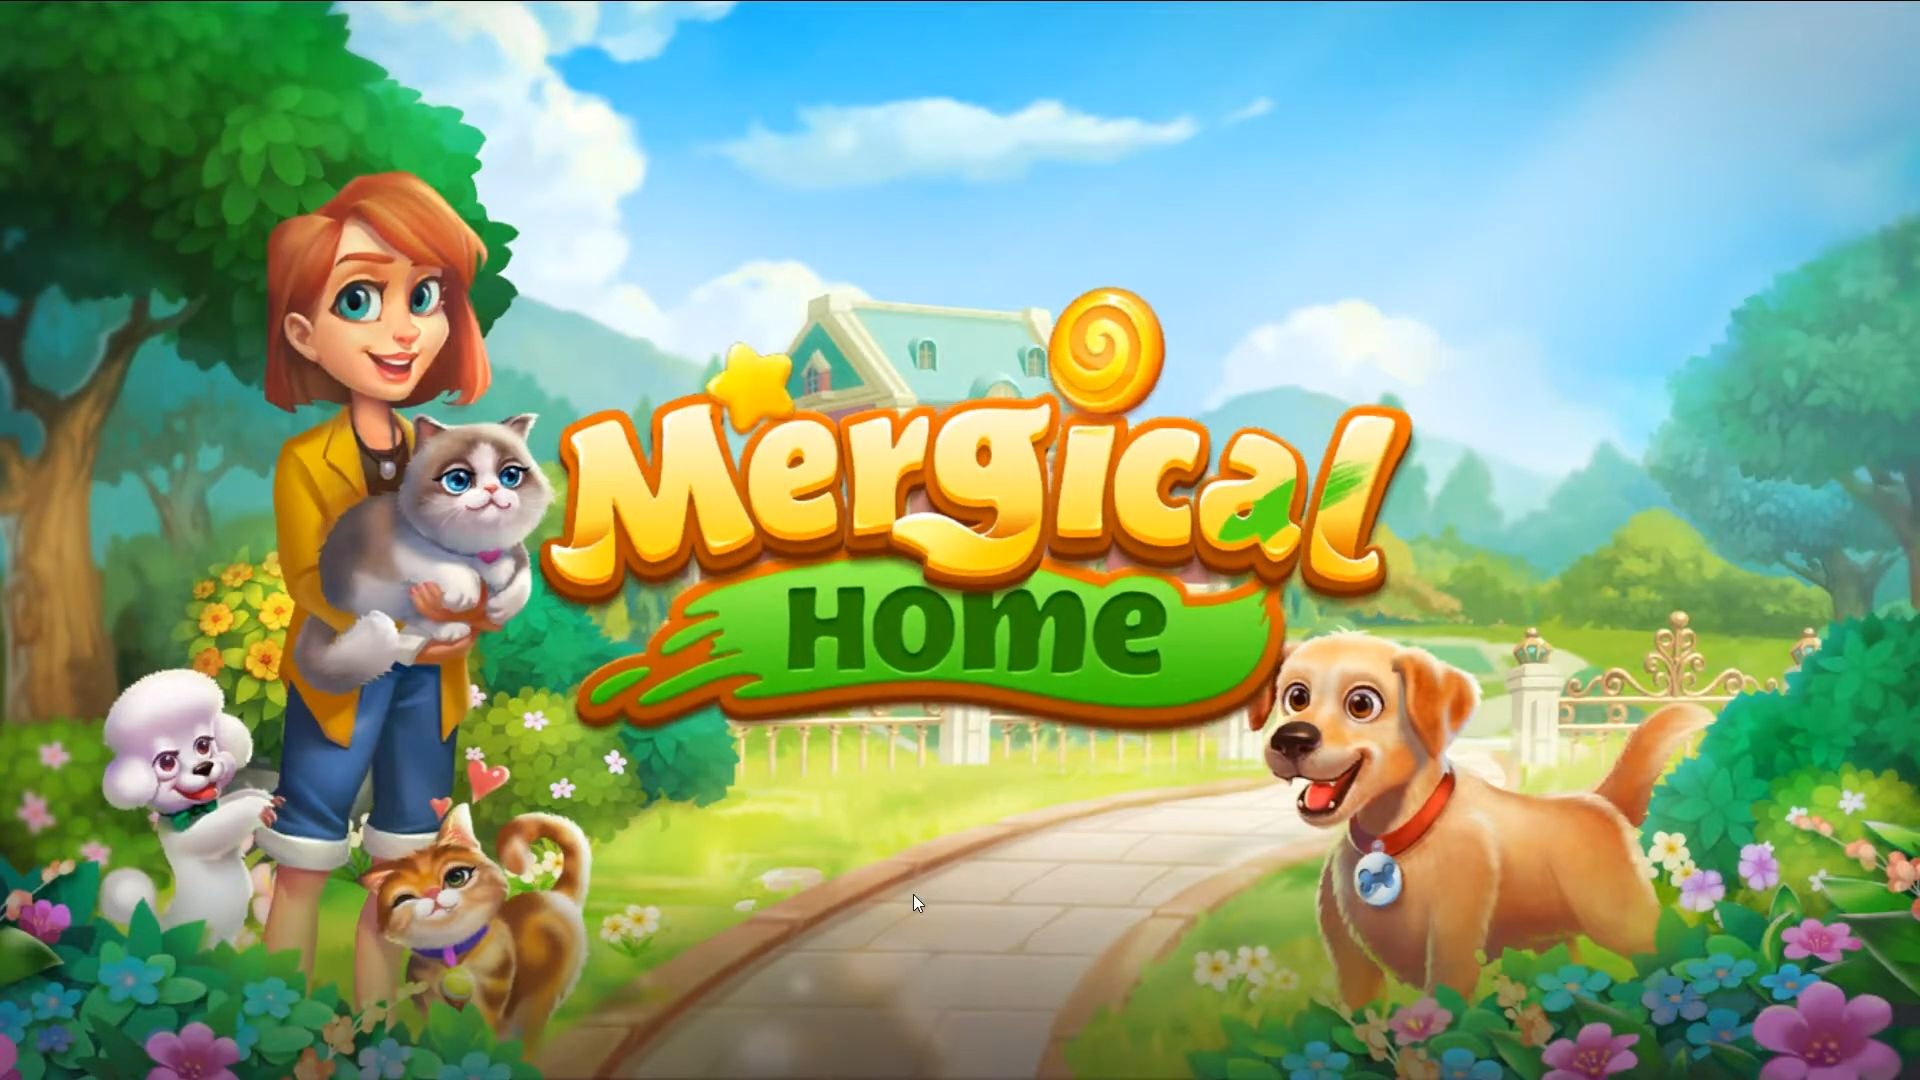 Scarica Mergical Home gratis per Android.